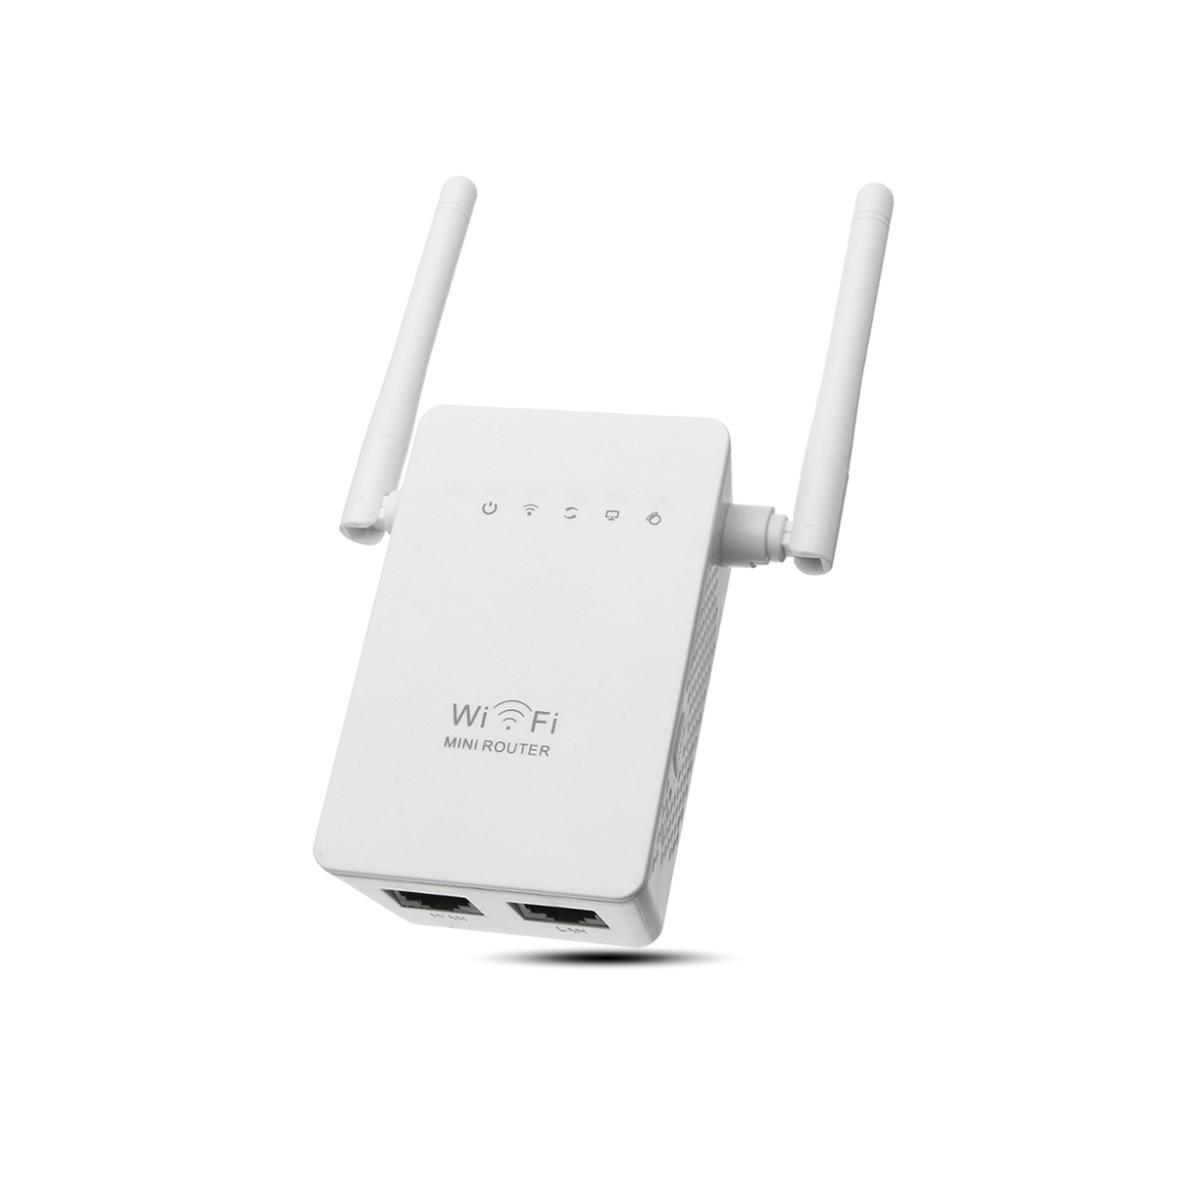 300Mbps Wireless Wifi Range Repeater Booster 802.11 Dual Antennas Wireless AP Router with LAN WAN Port 2